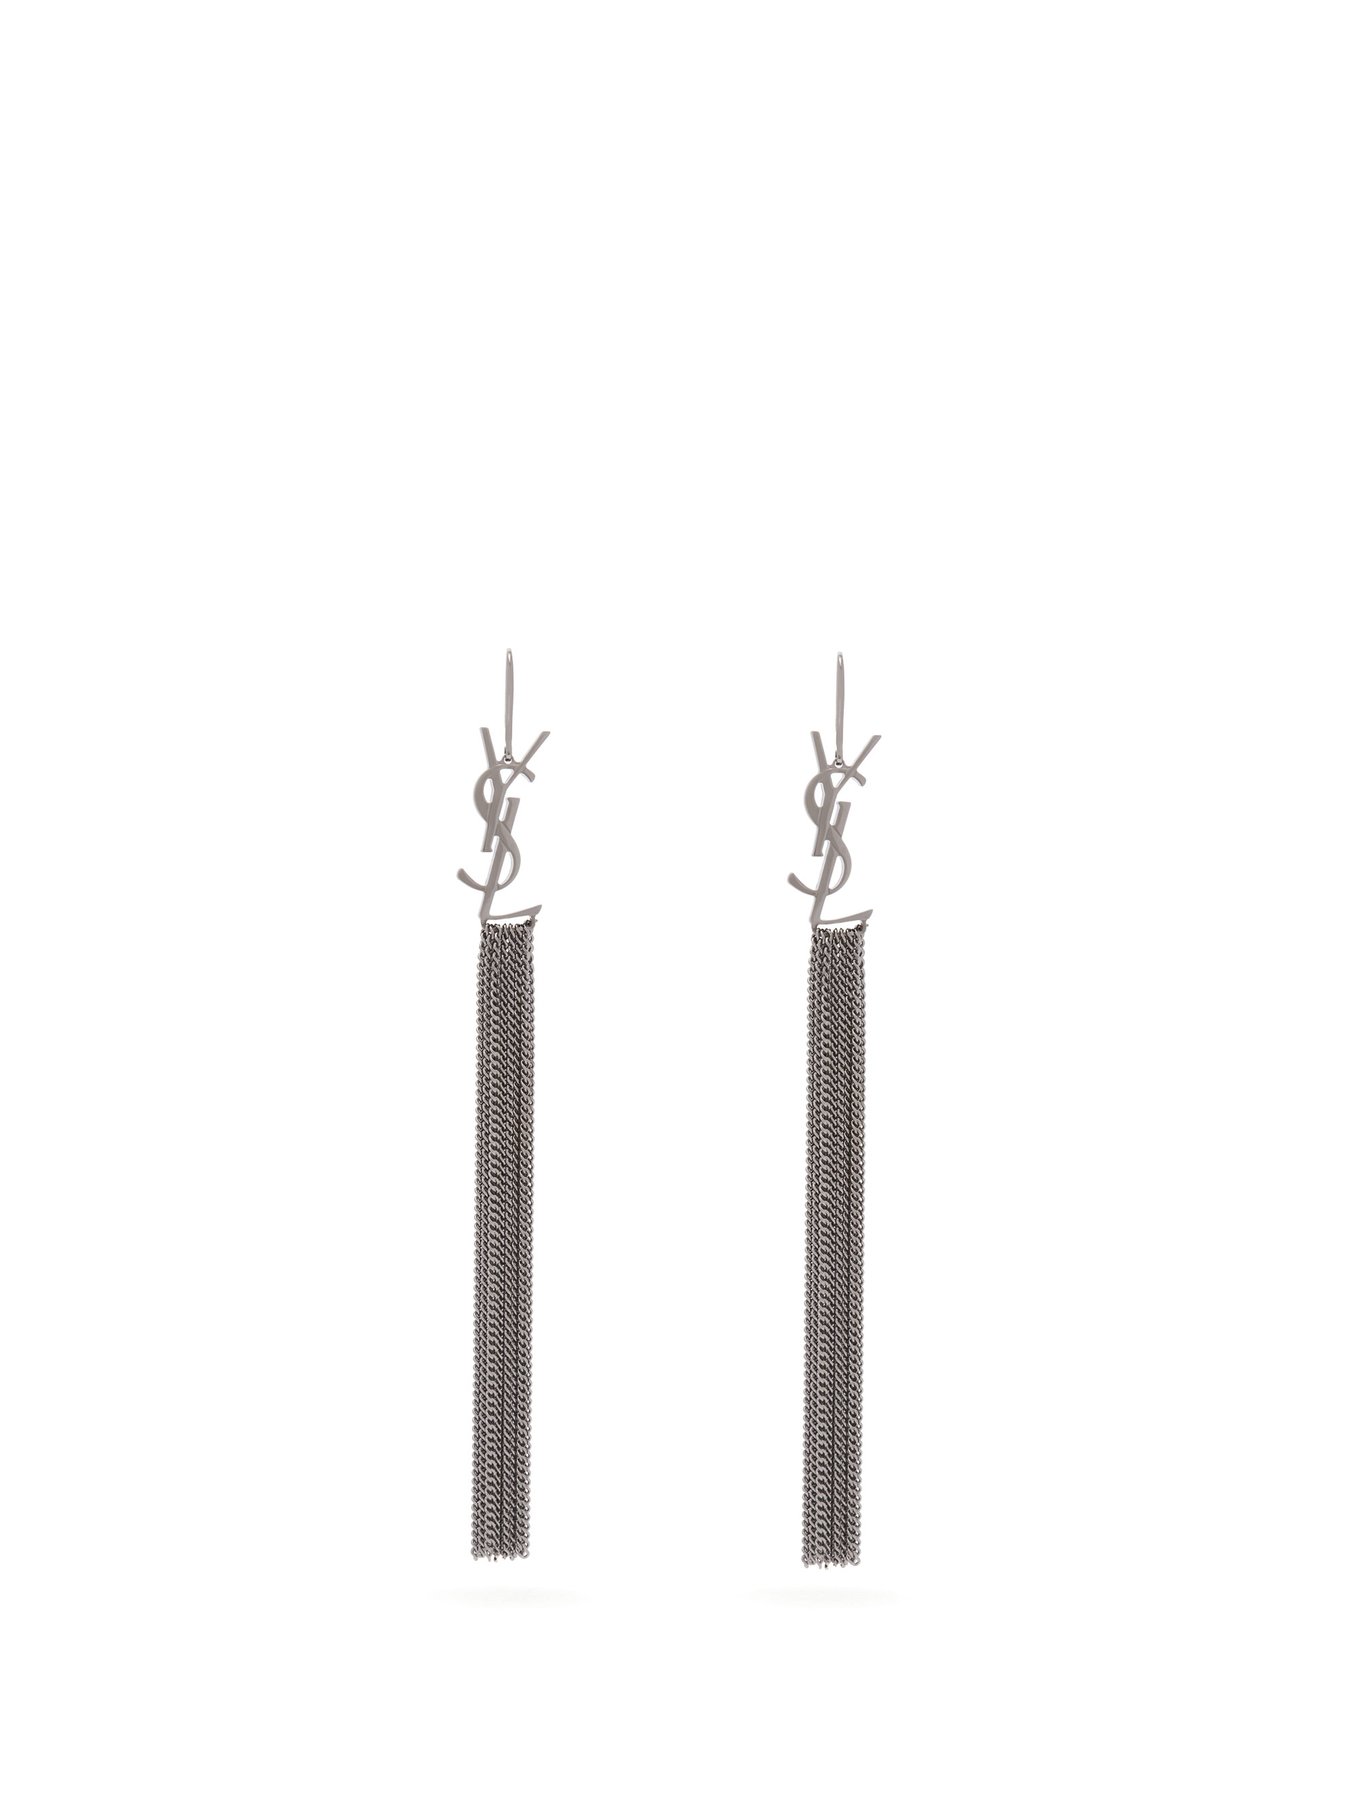 Silver earrings Mistral prints and tassels